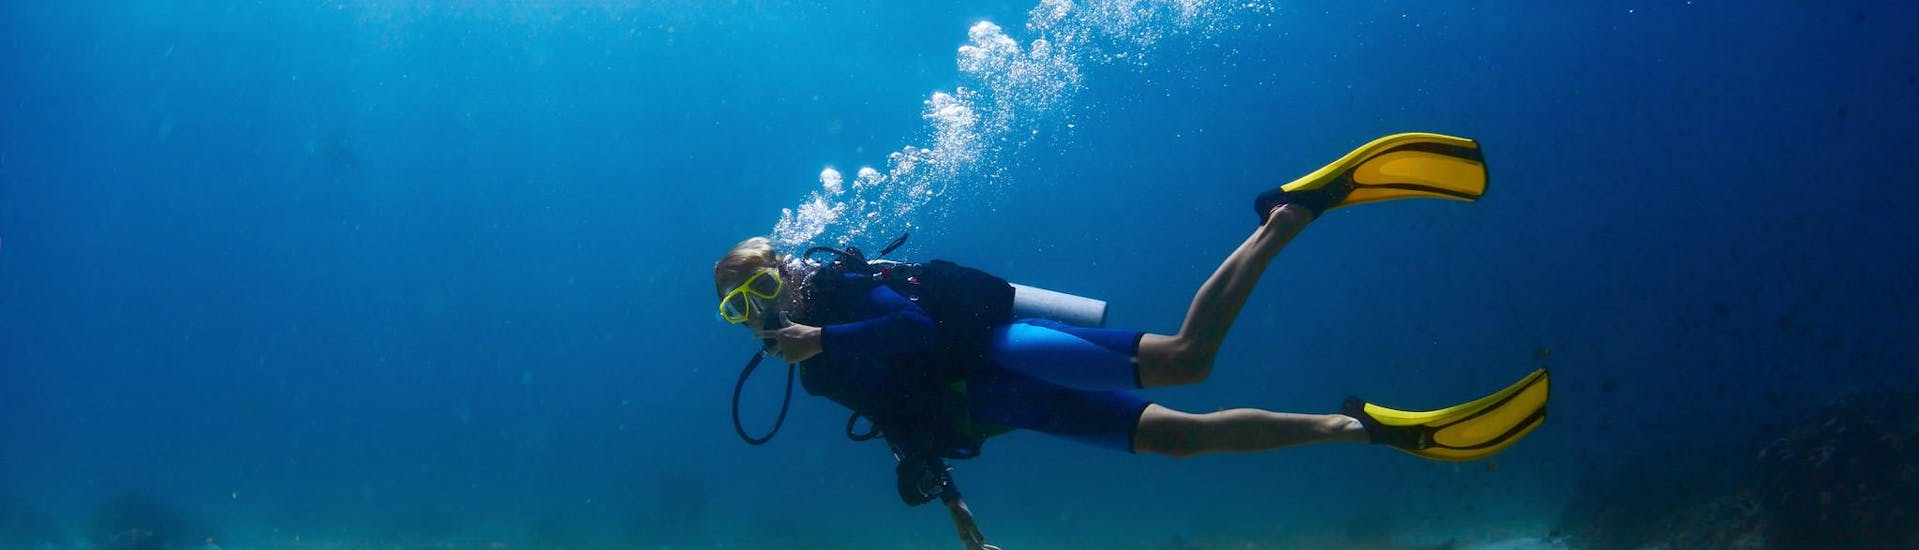 A man looking at the camera during a scuba diving activity around the island.